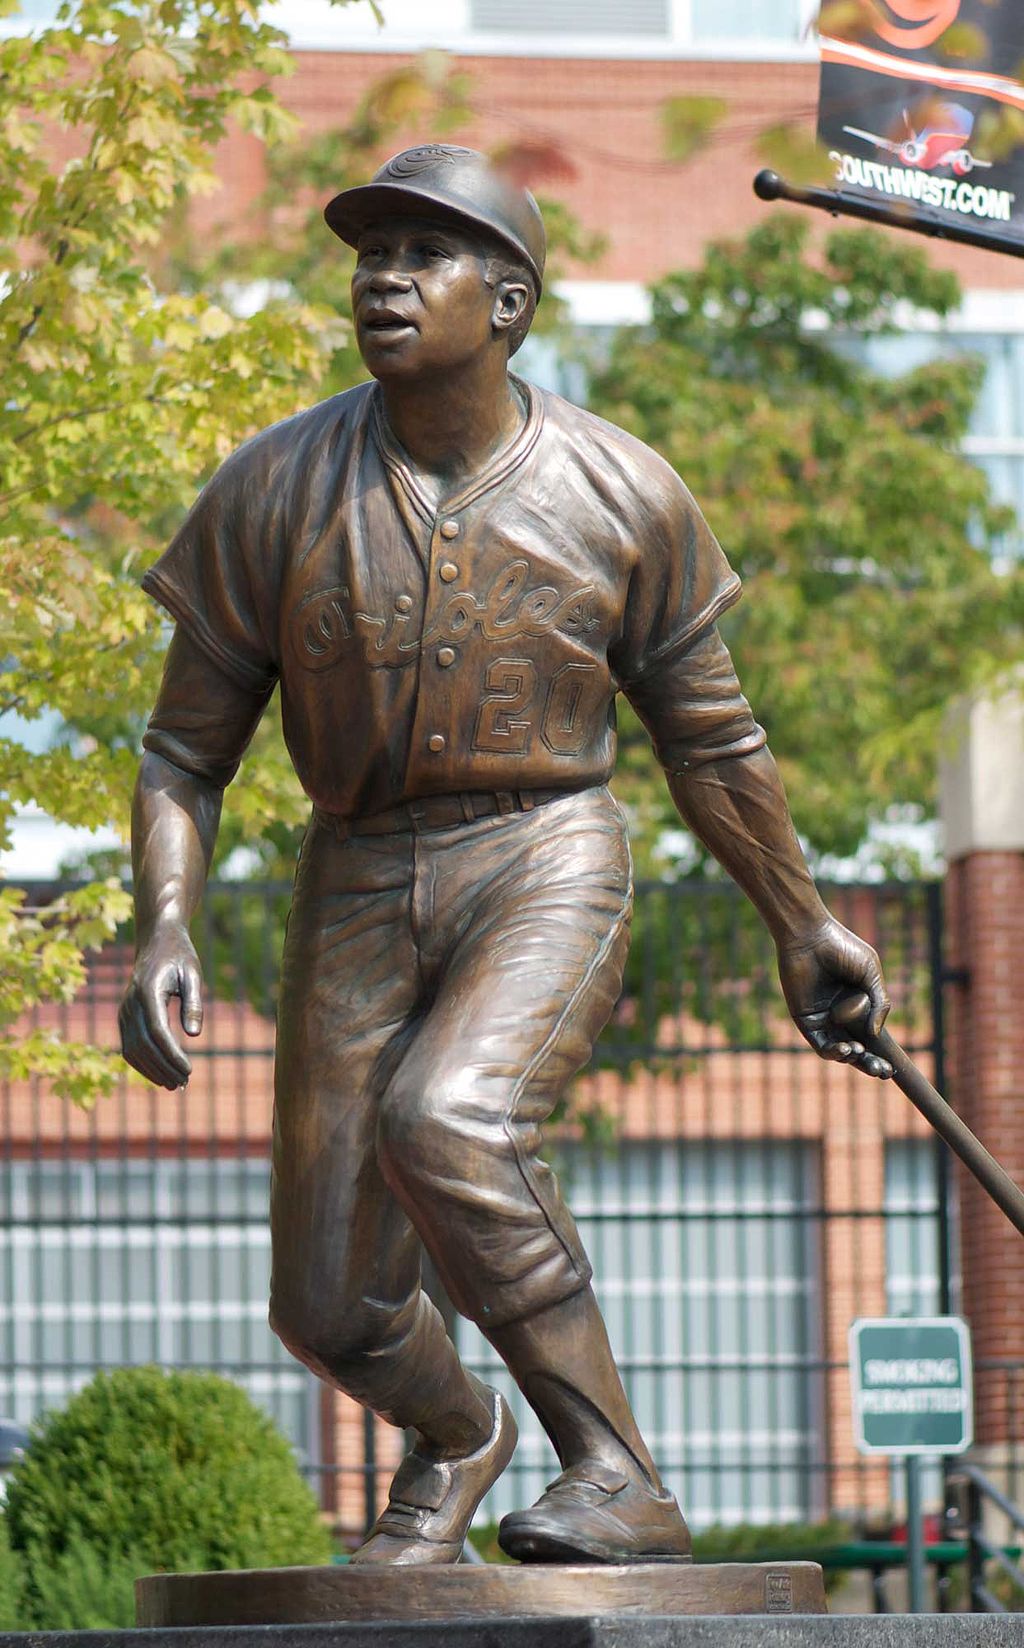 R.I.P. Frank Robinson: They Don't Build Statues in Stadiums of